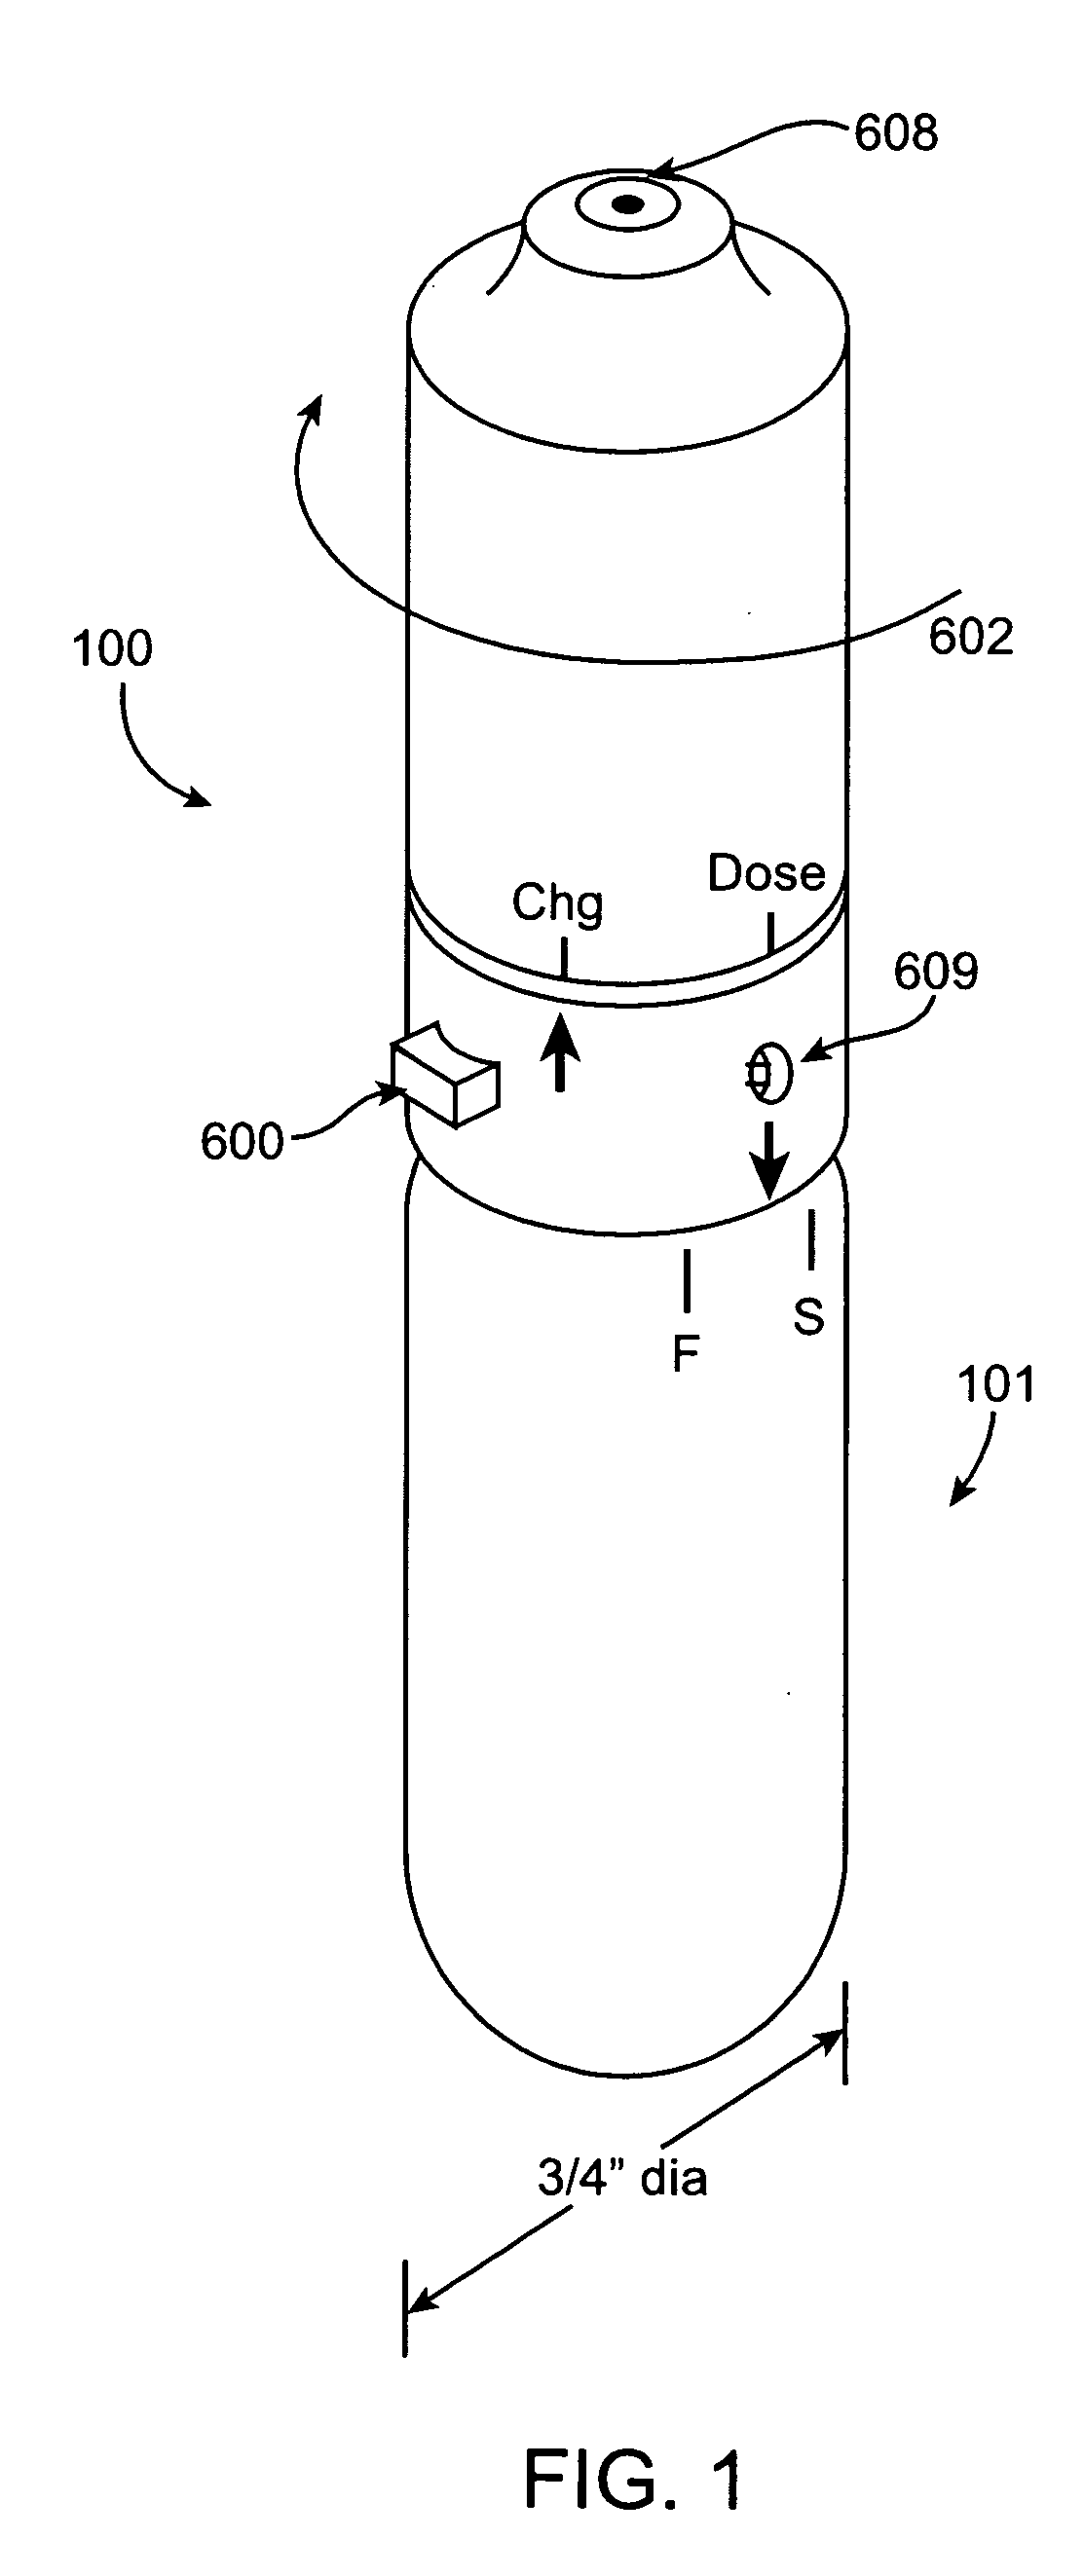 Methods and apparatus for the enhanced delivery of physiologic agents to tissue surfaces